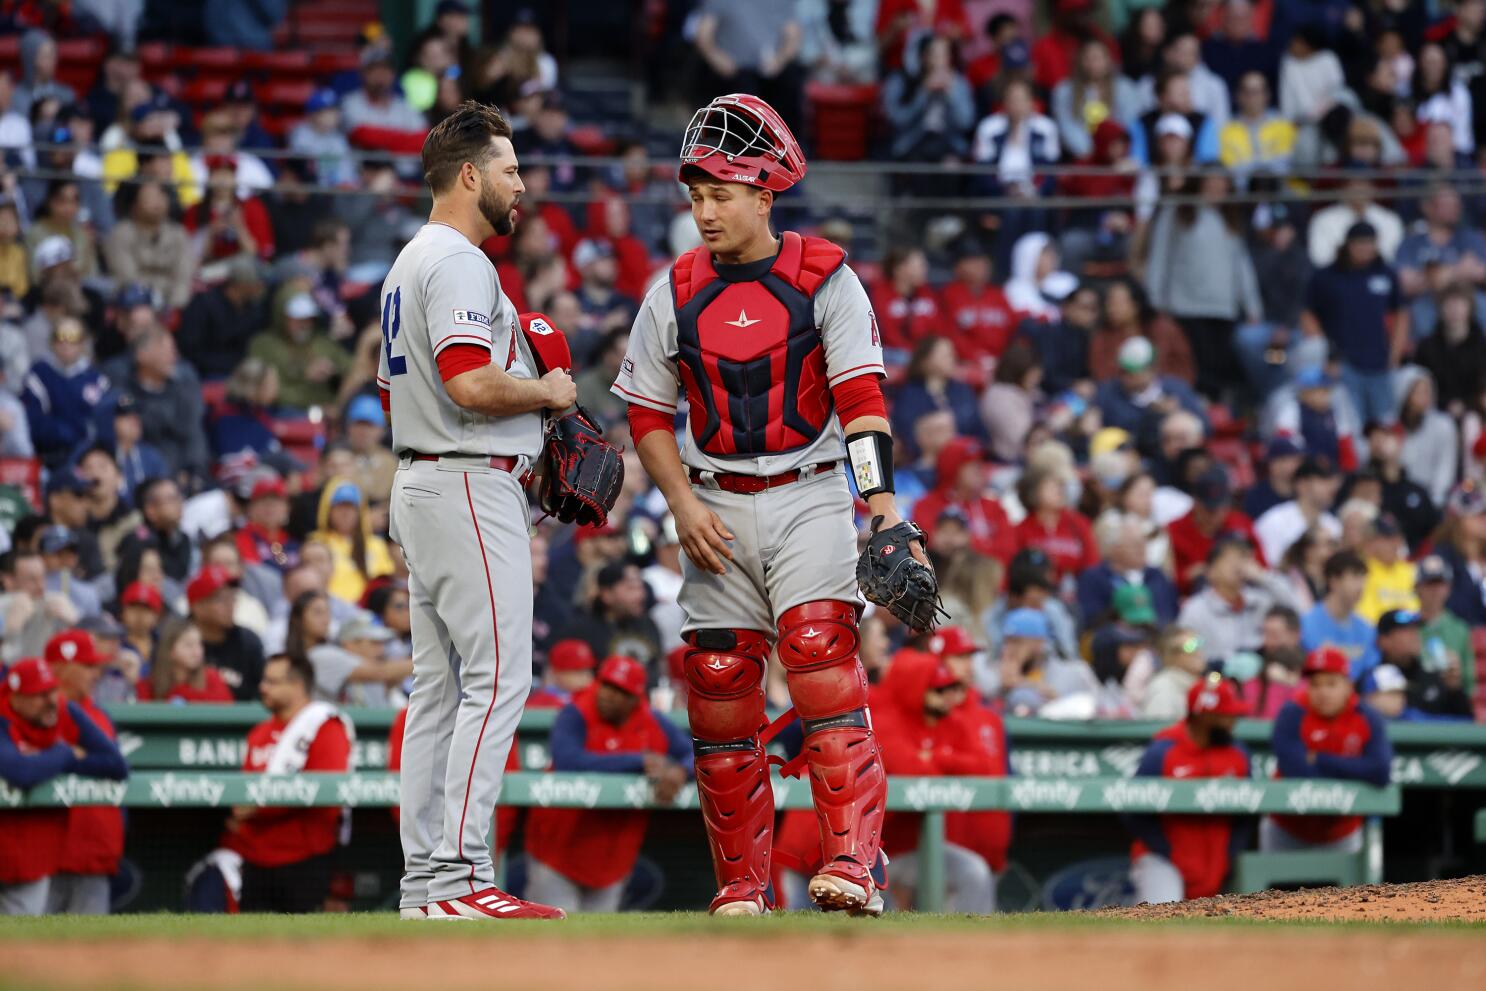 Boston Red Sox: Top 5 catchers in franchise history